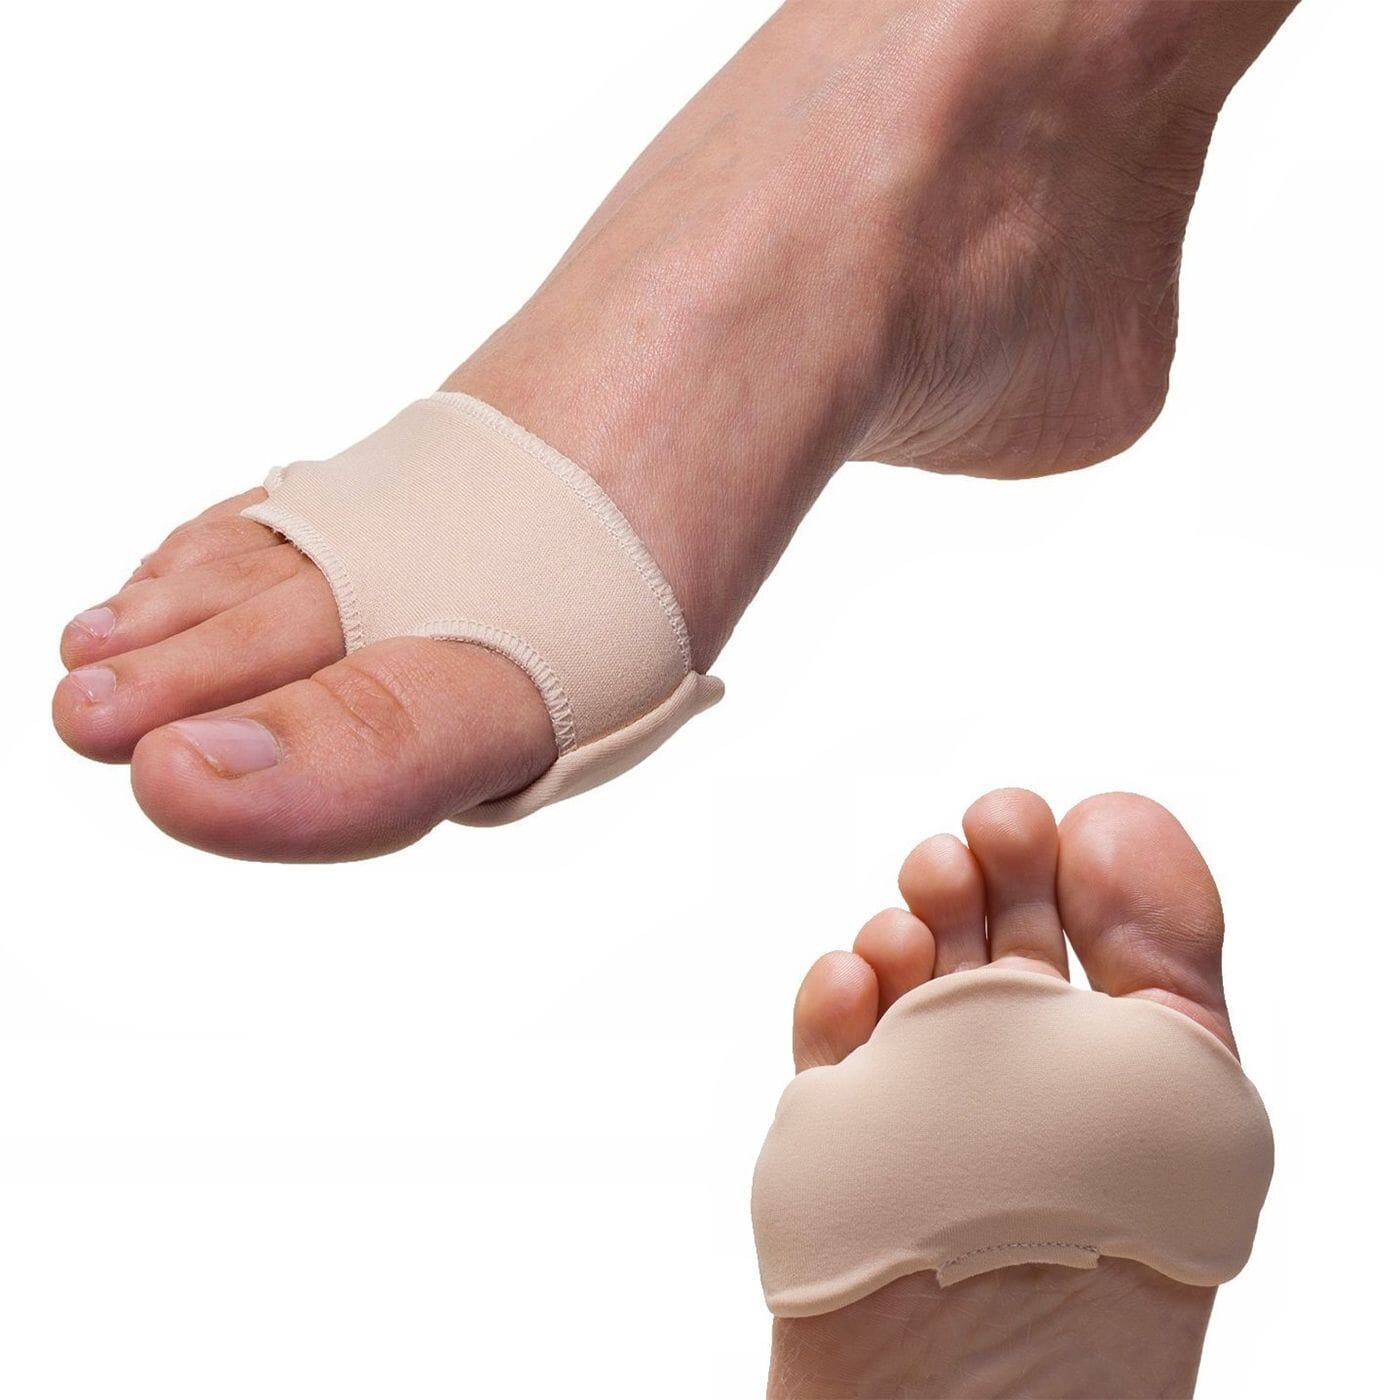 View Gelsmart Thin Forefoot Cushion information